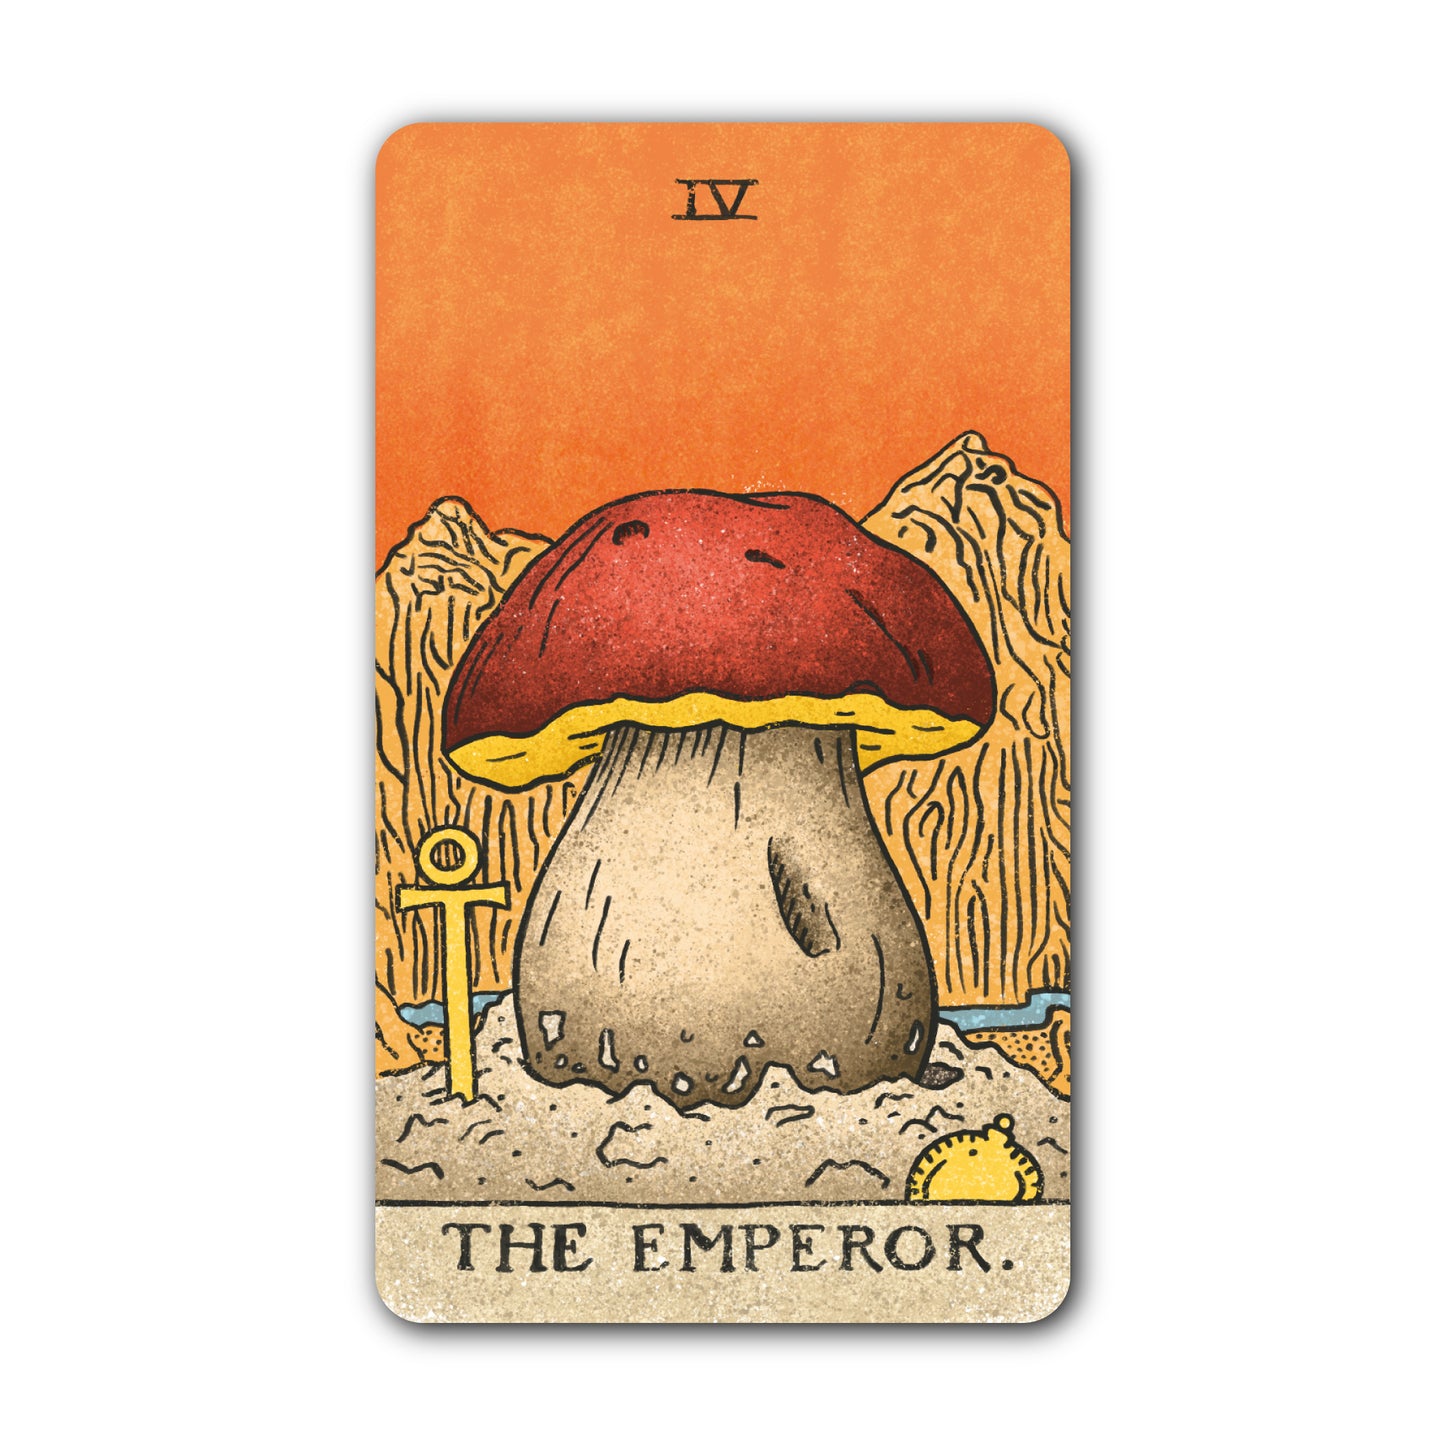 Individual Stickers of Cards from the Mushroom Hunter’s Tarot